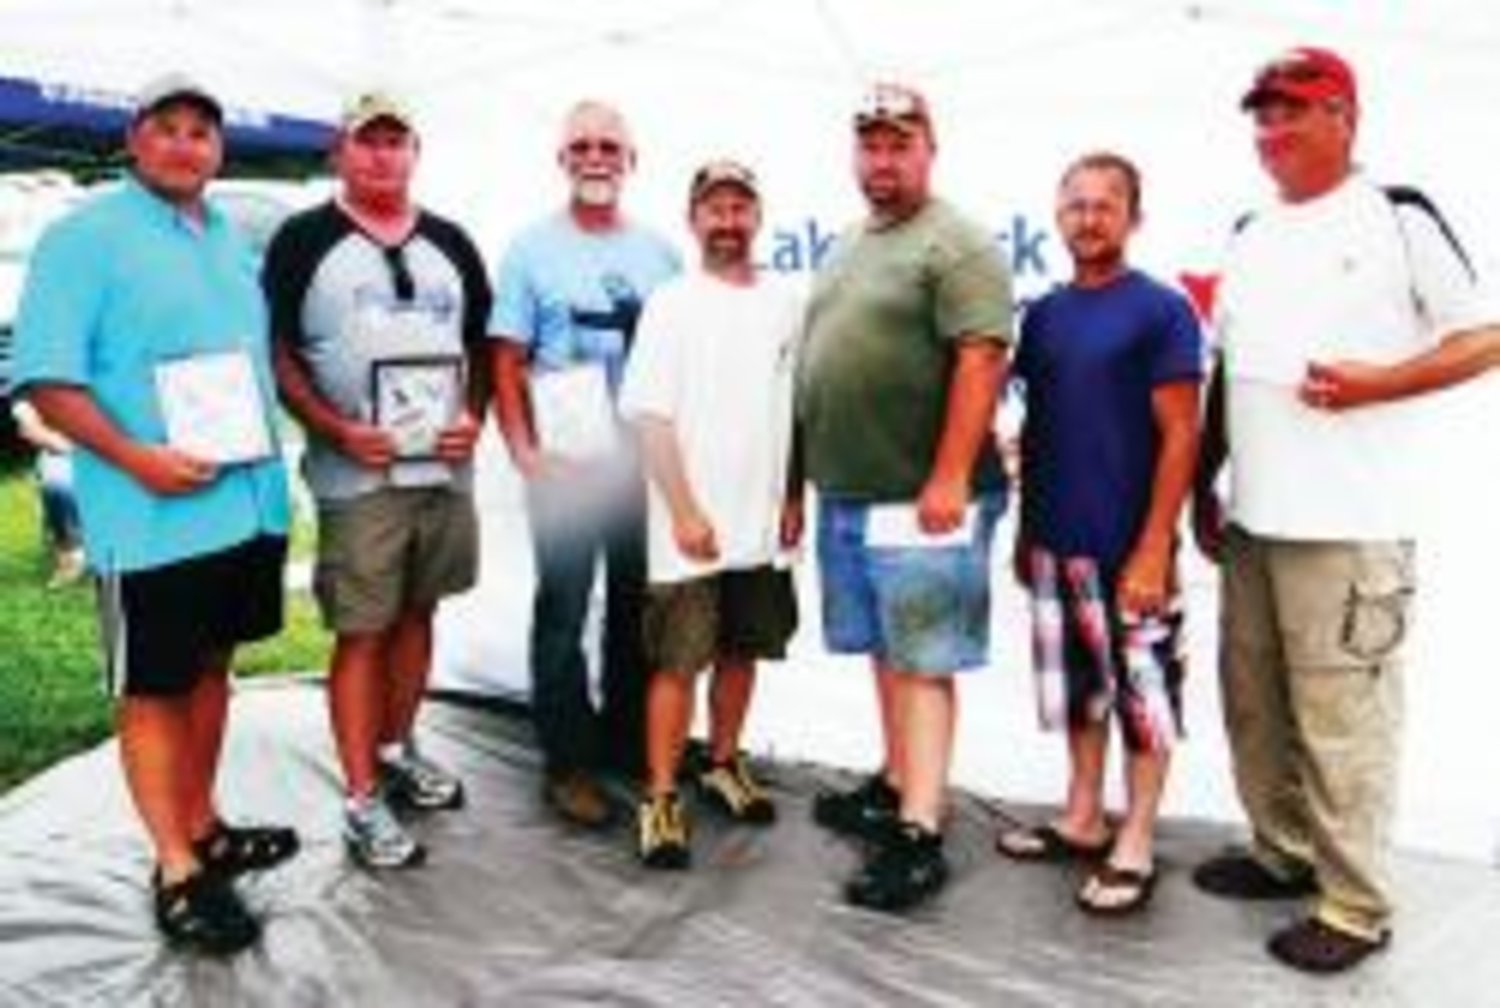 Catfish tourney group winners: The top anglers of the Lake Fork Catfish Classic. From left to right: Steve Jones, Larry Jenkins, Thomas Roedell, Roger Stroman, Johnny Brown, Rodney Brantley and James Nugent. Photo/Dick Walker, Lake Fork Sportsman's Association